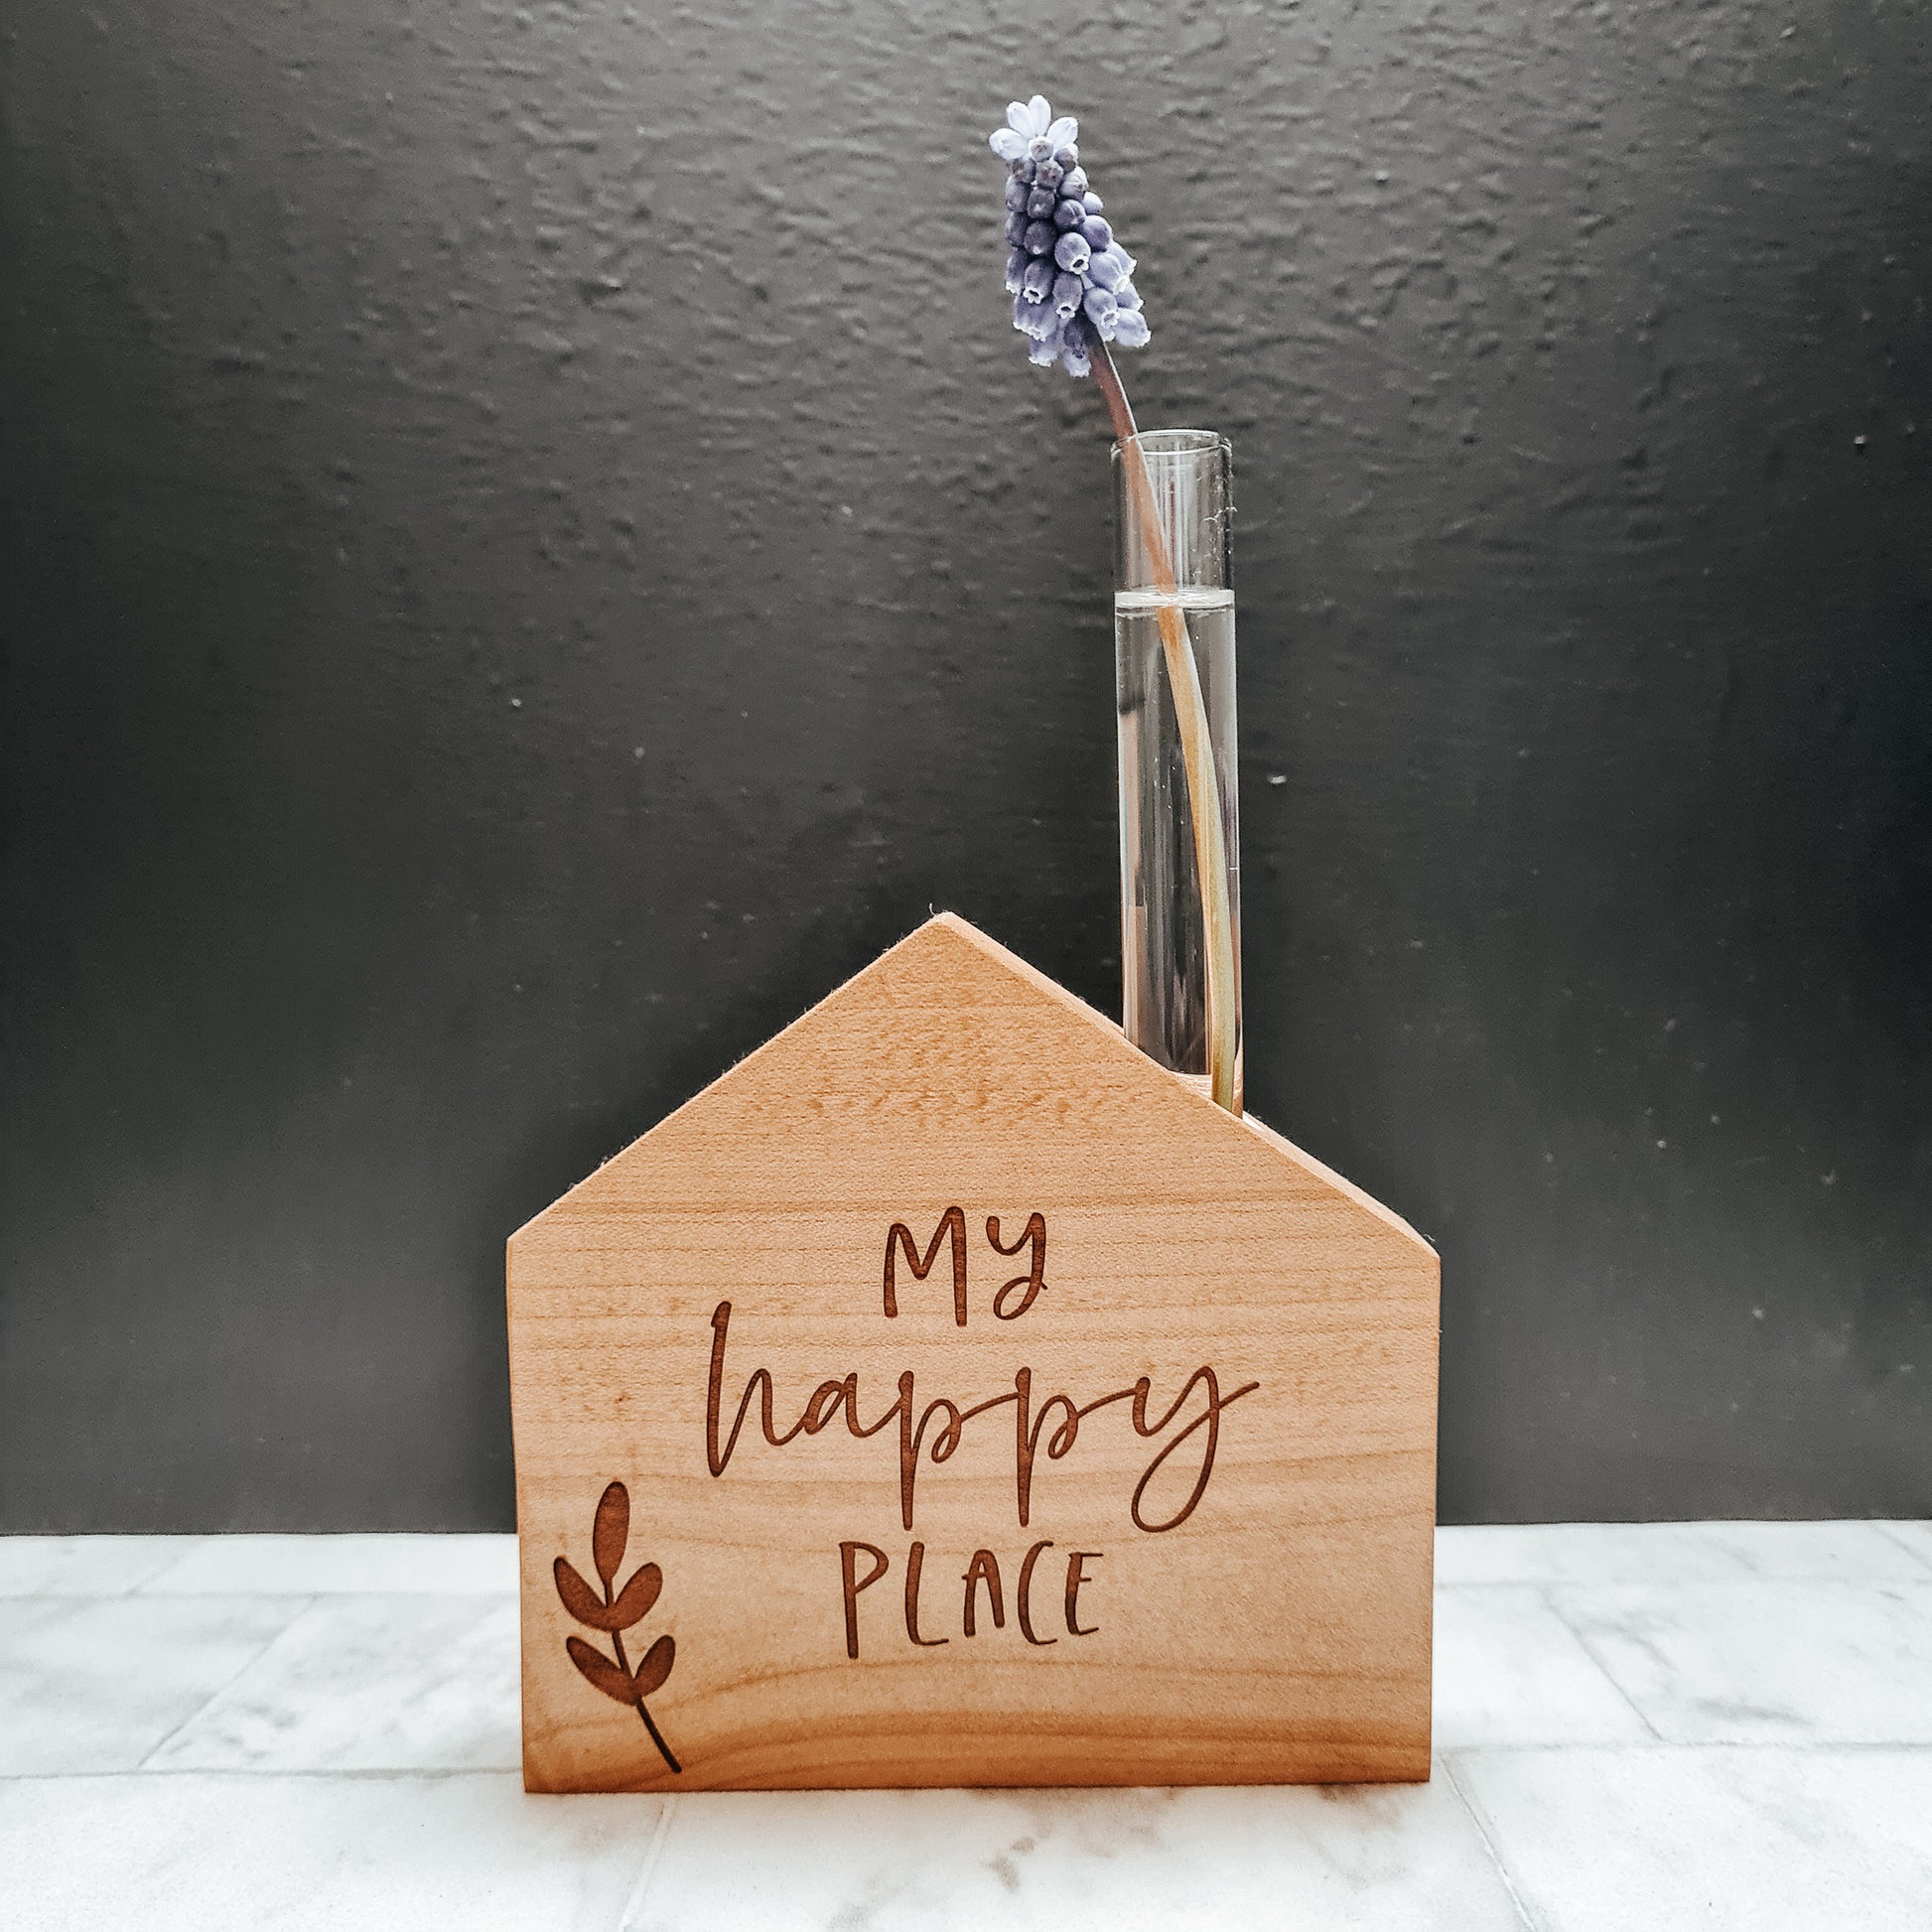 plant lover gift - my happy place, wooden house shaped test tube vase holder for propogation